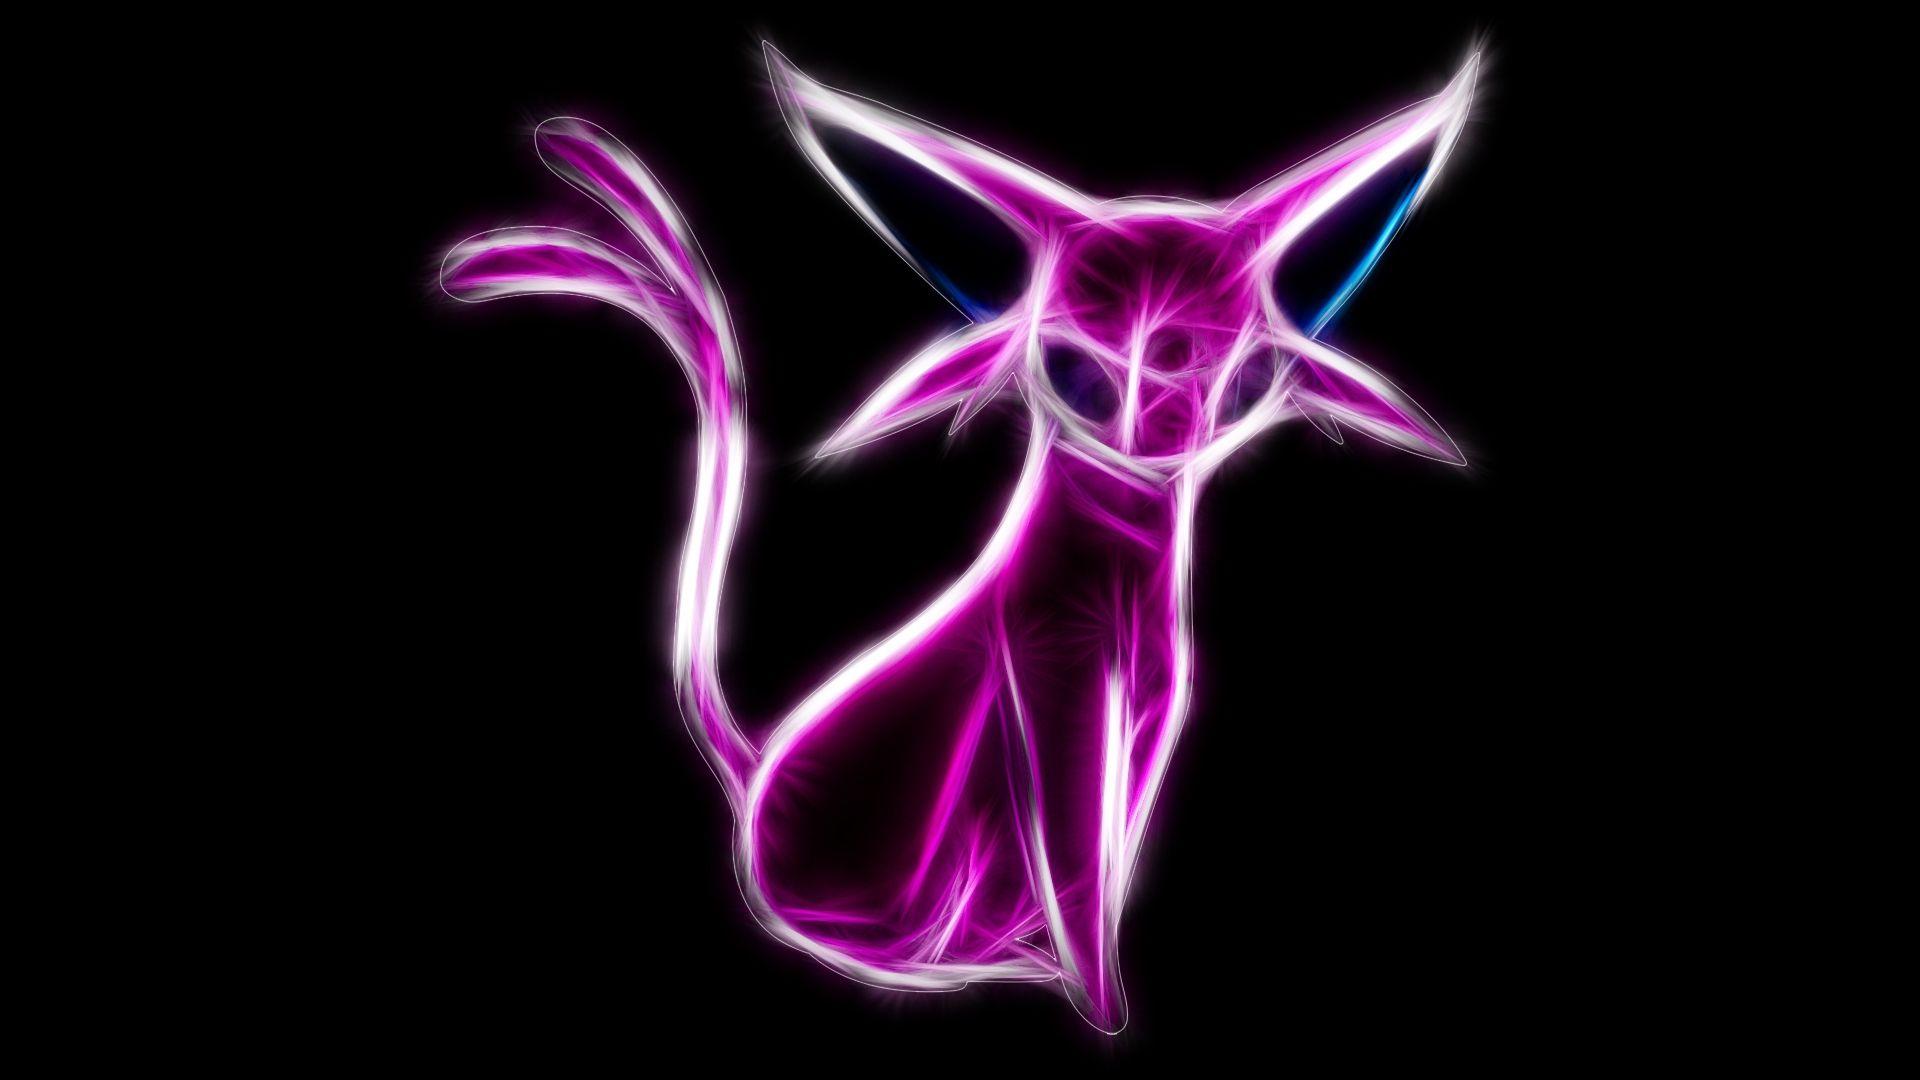 Espeon Wallpaper Image Photo Picture Background